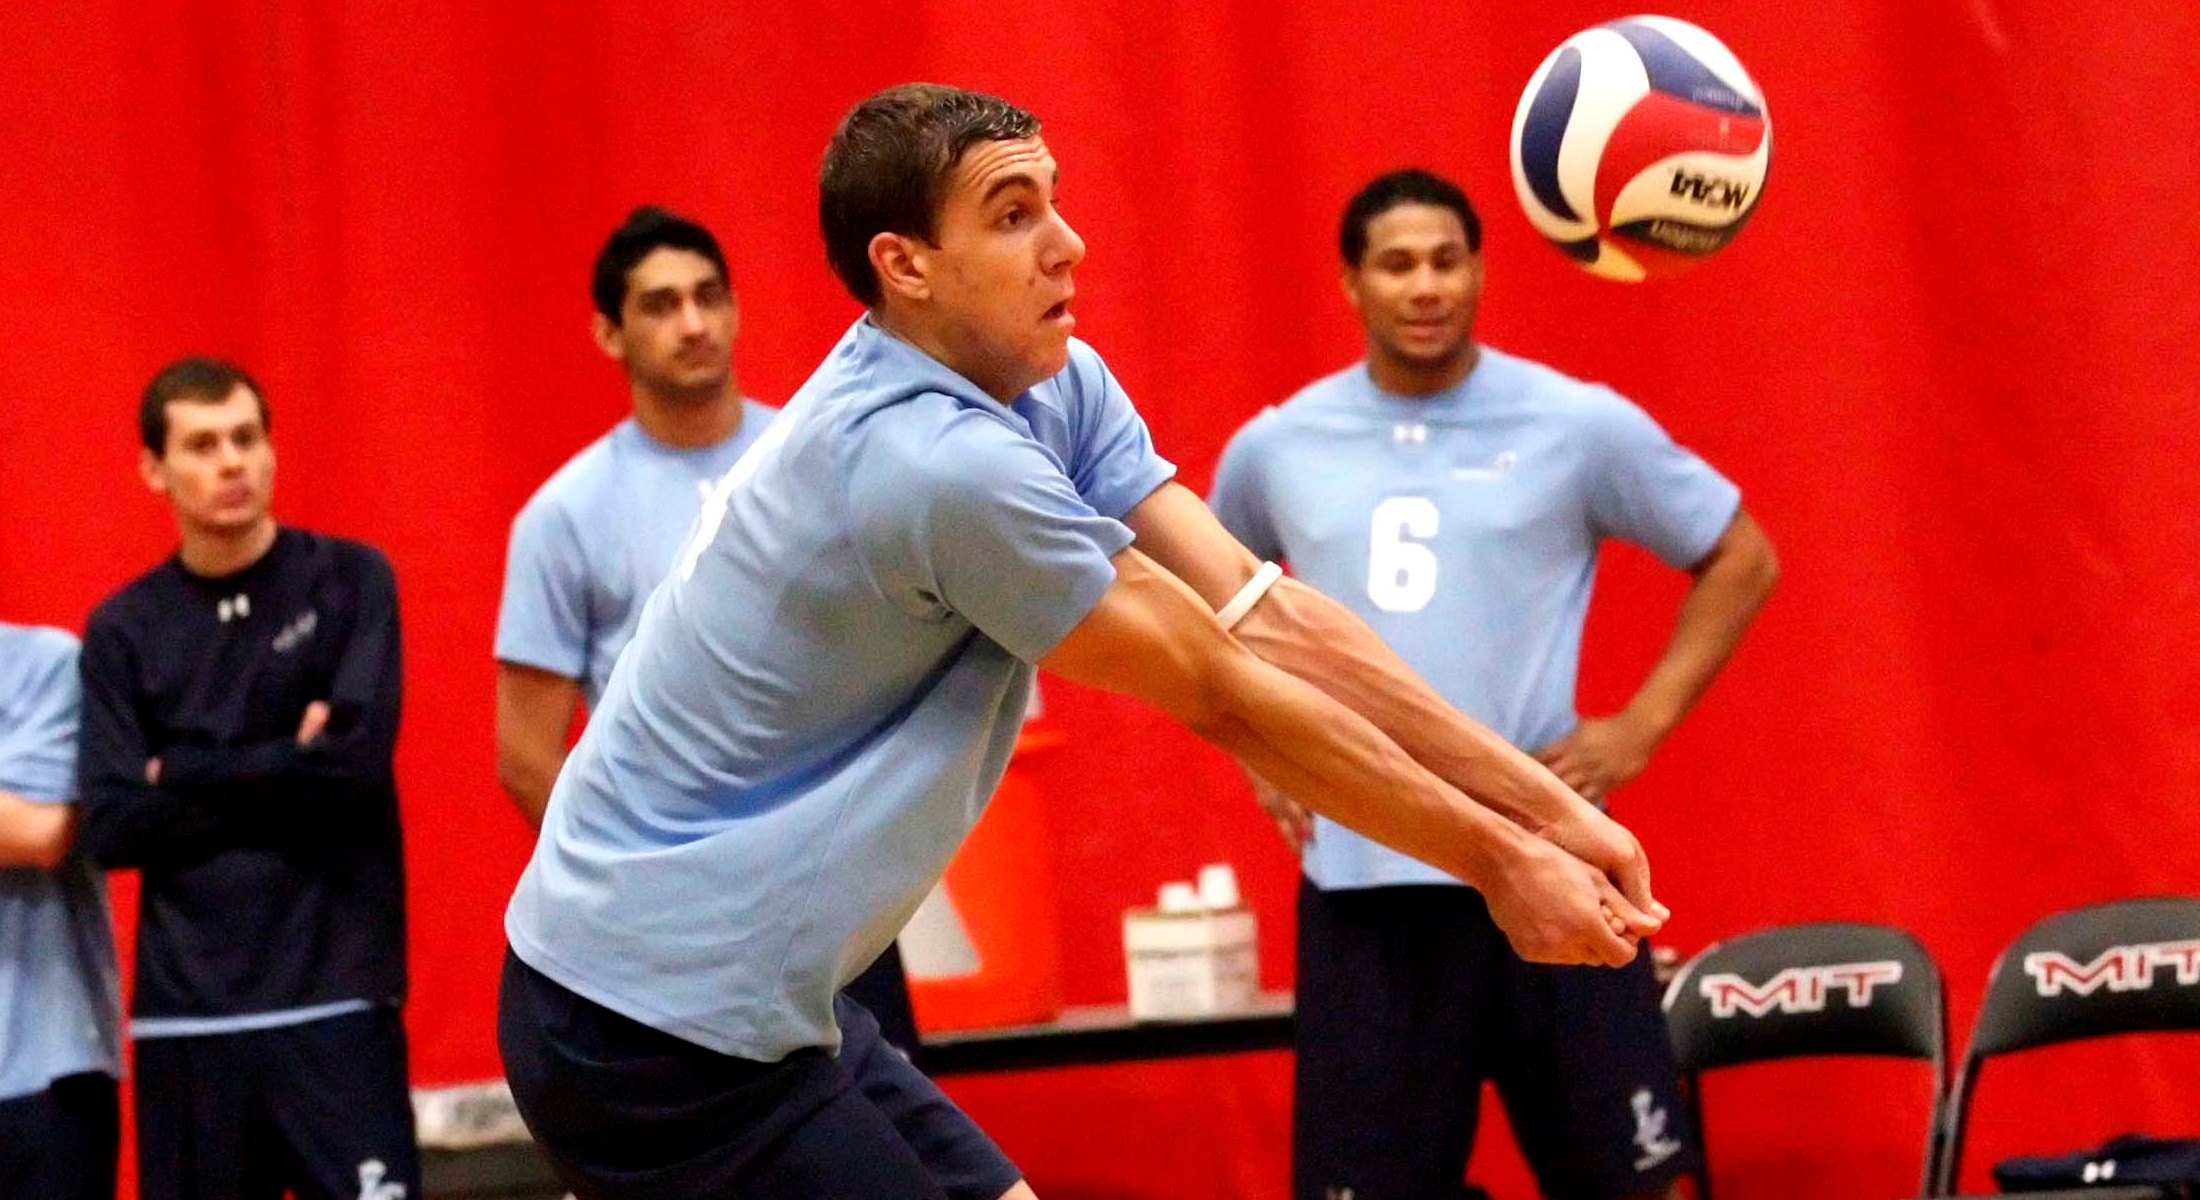 Men's Volleyball Sweeps GNAC Tri-Match with Pair of Straight Set Wins